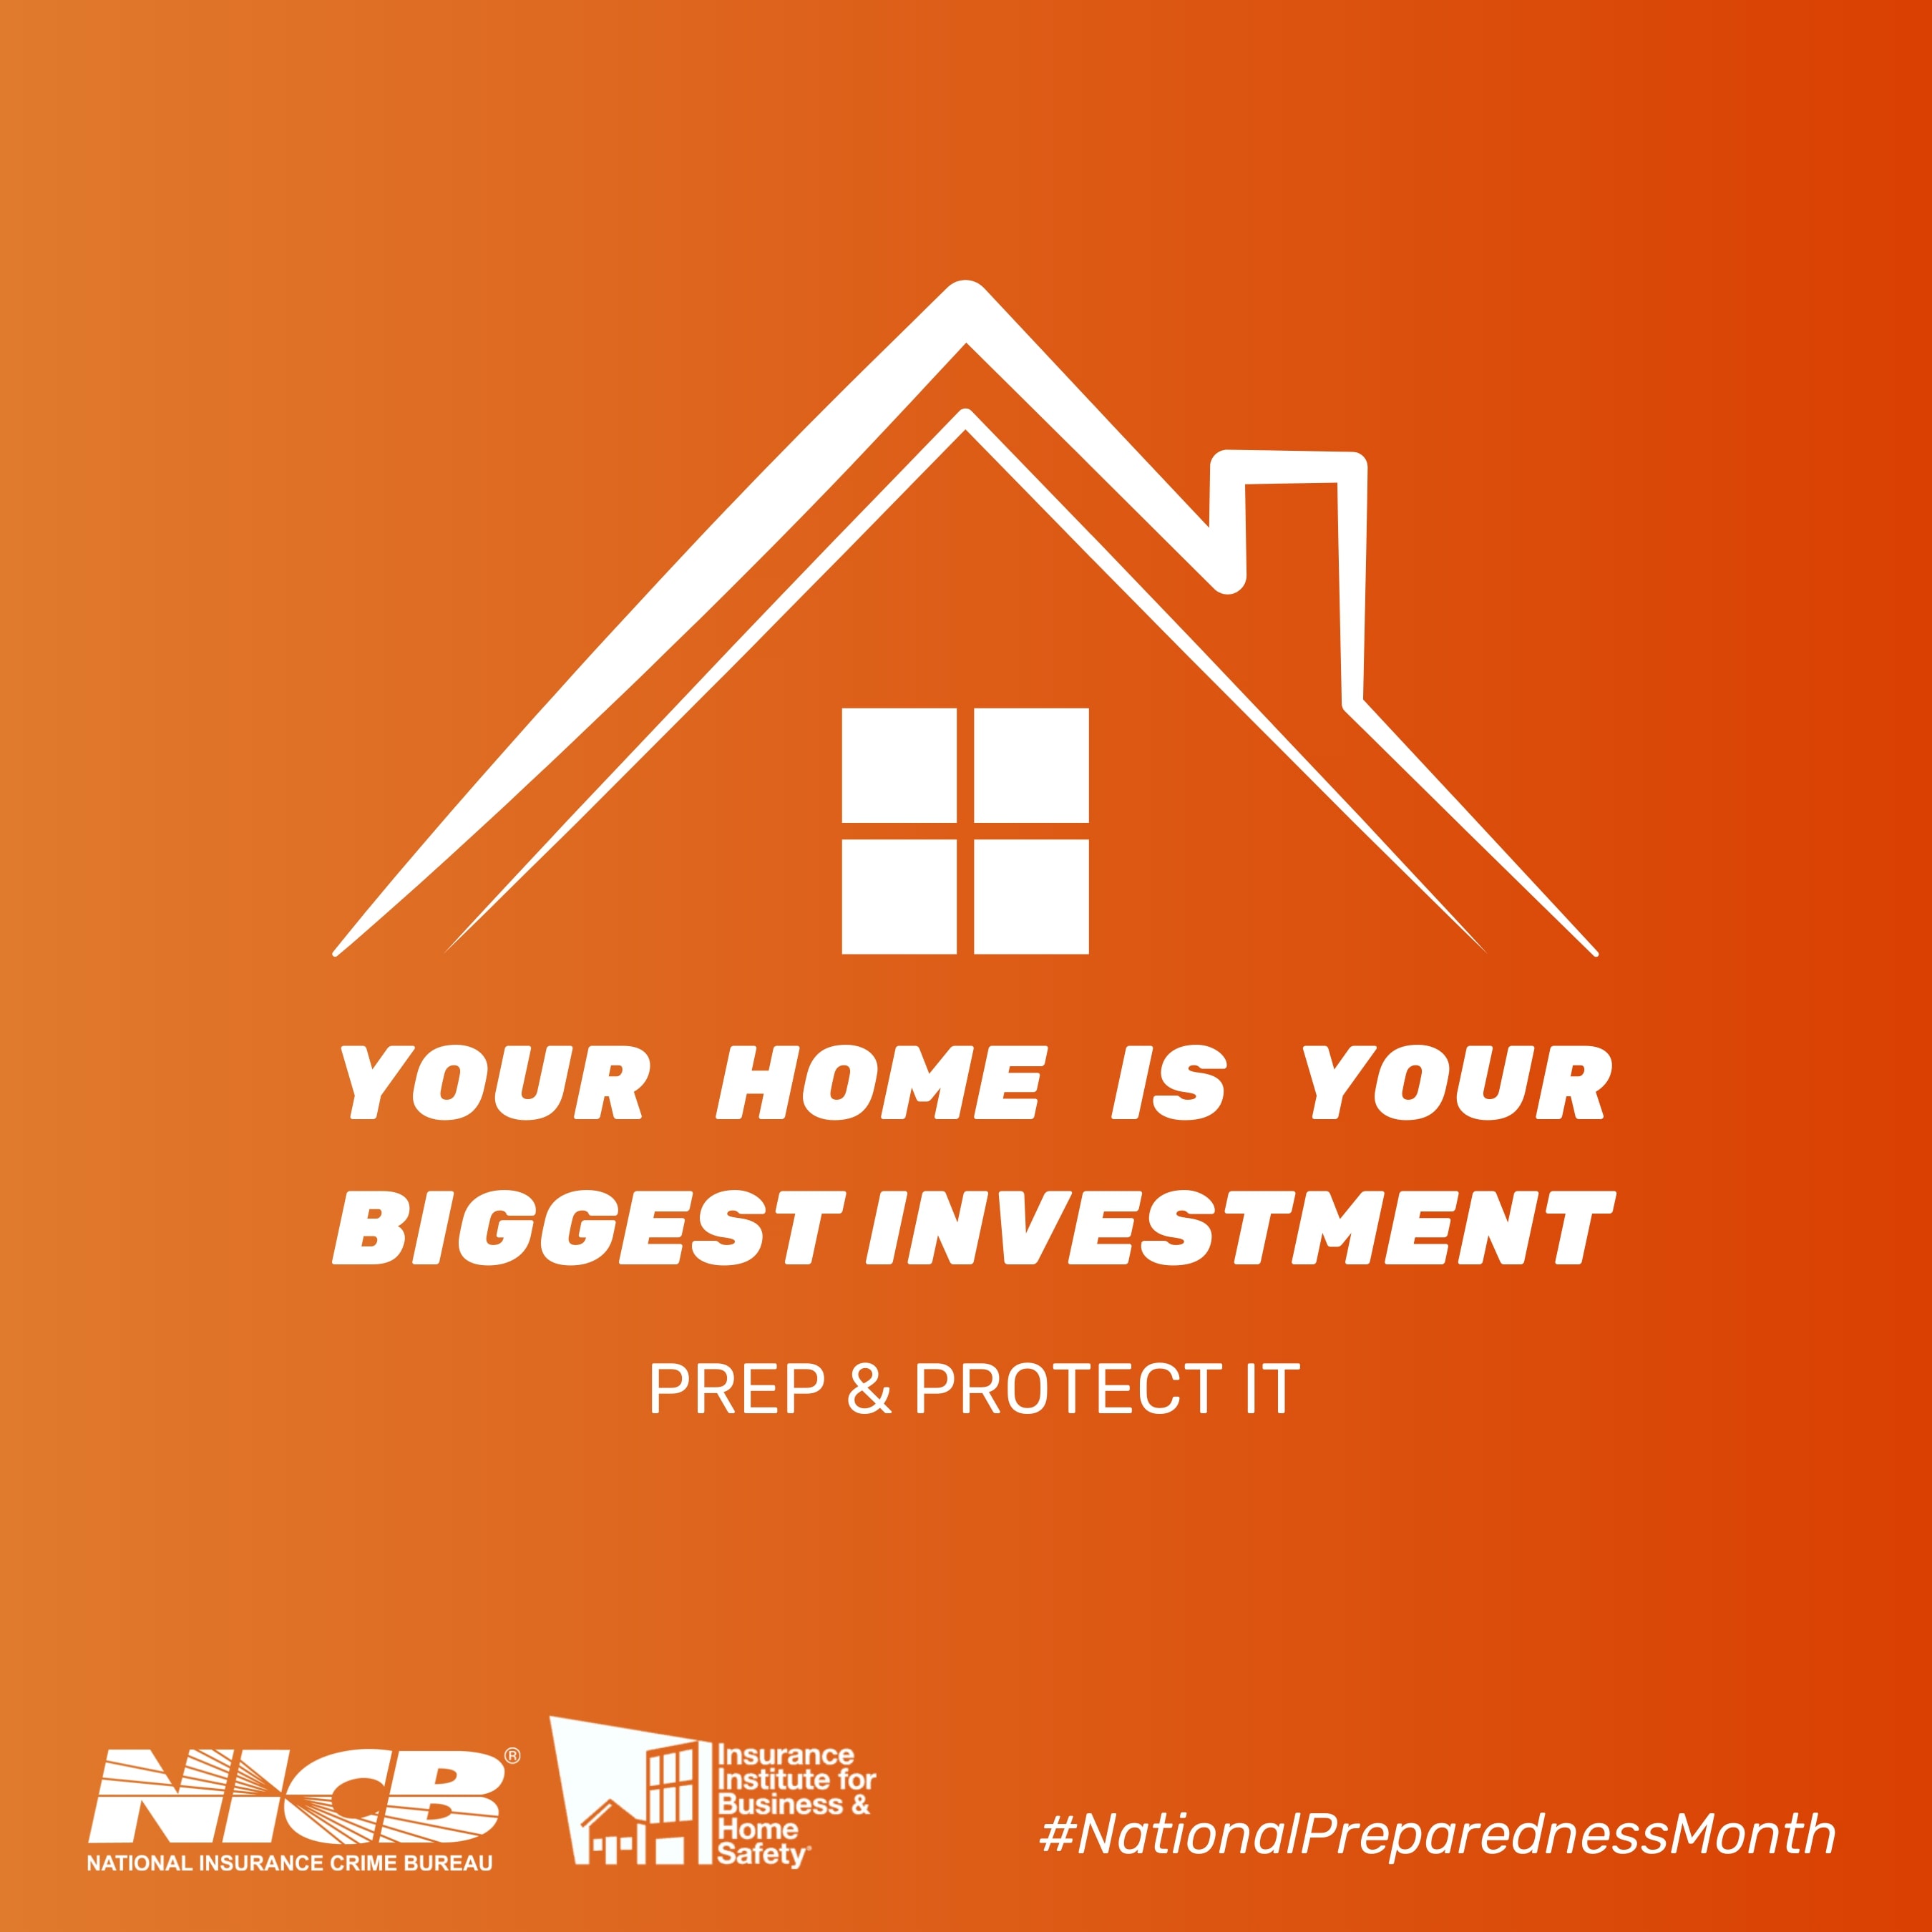 Your Home Is Your Biggest Investment